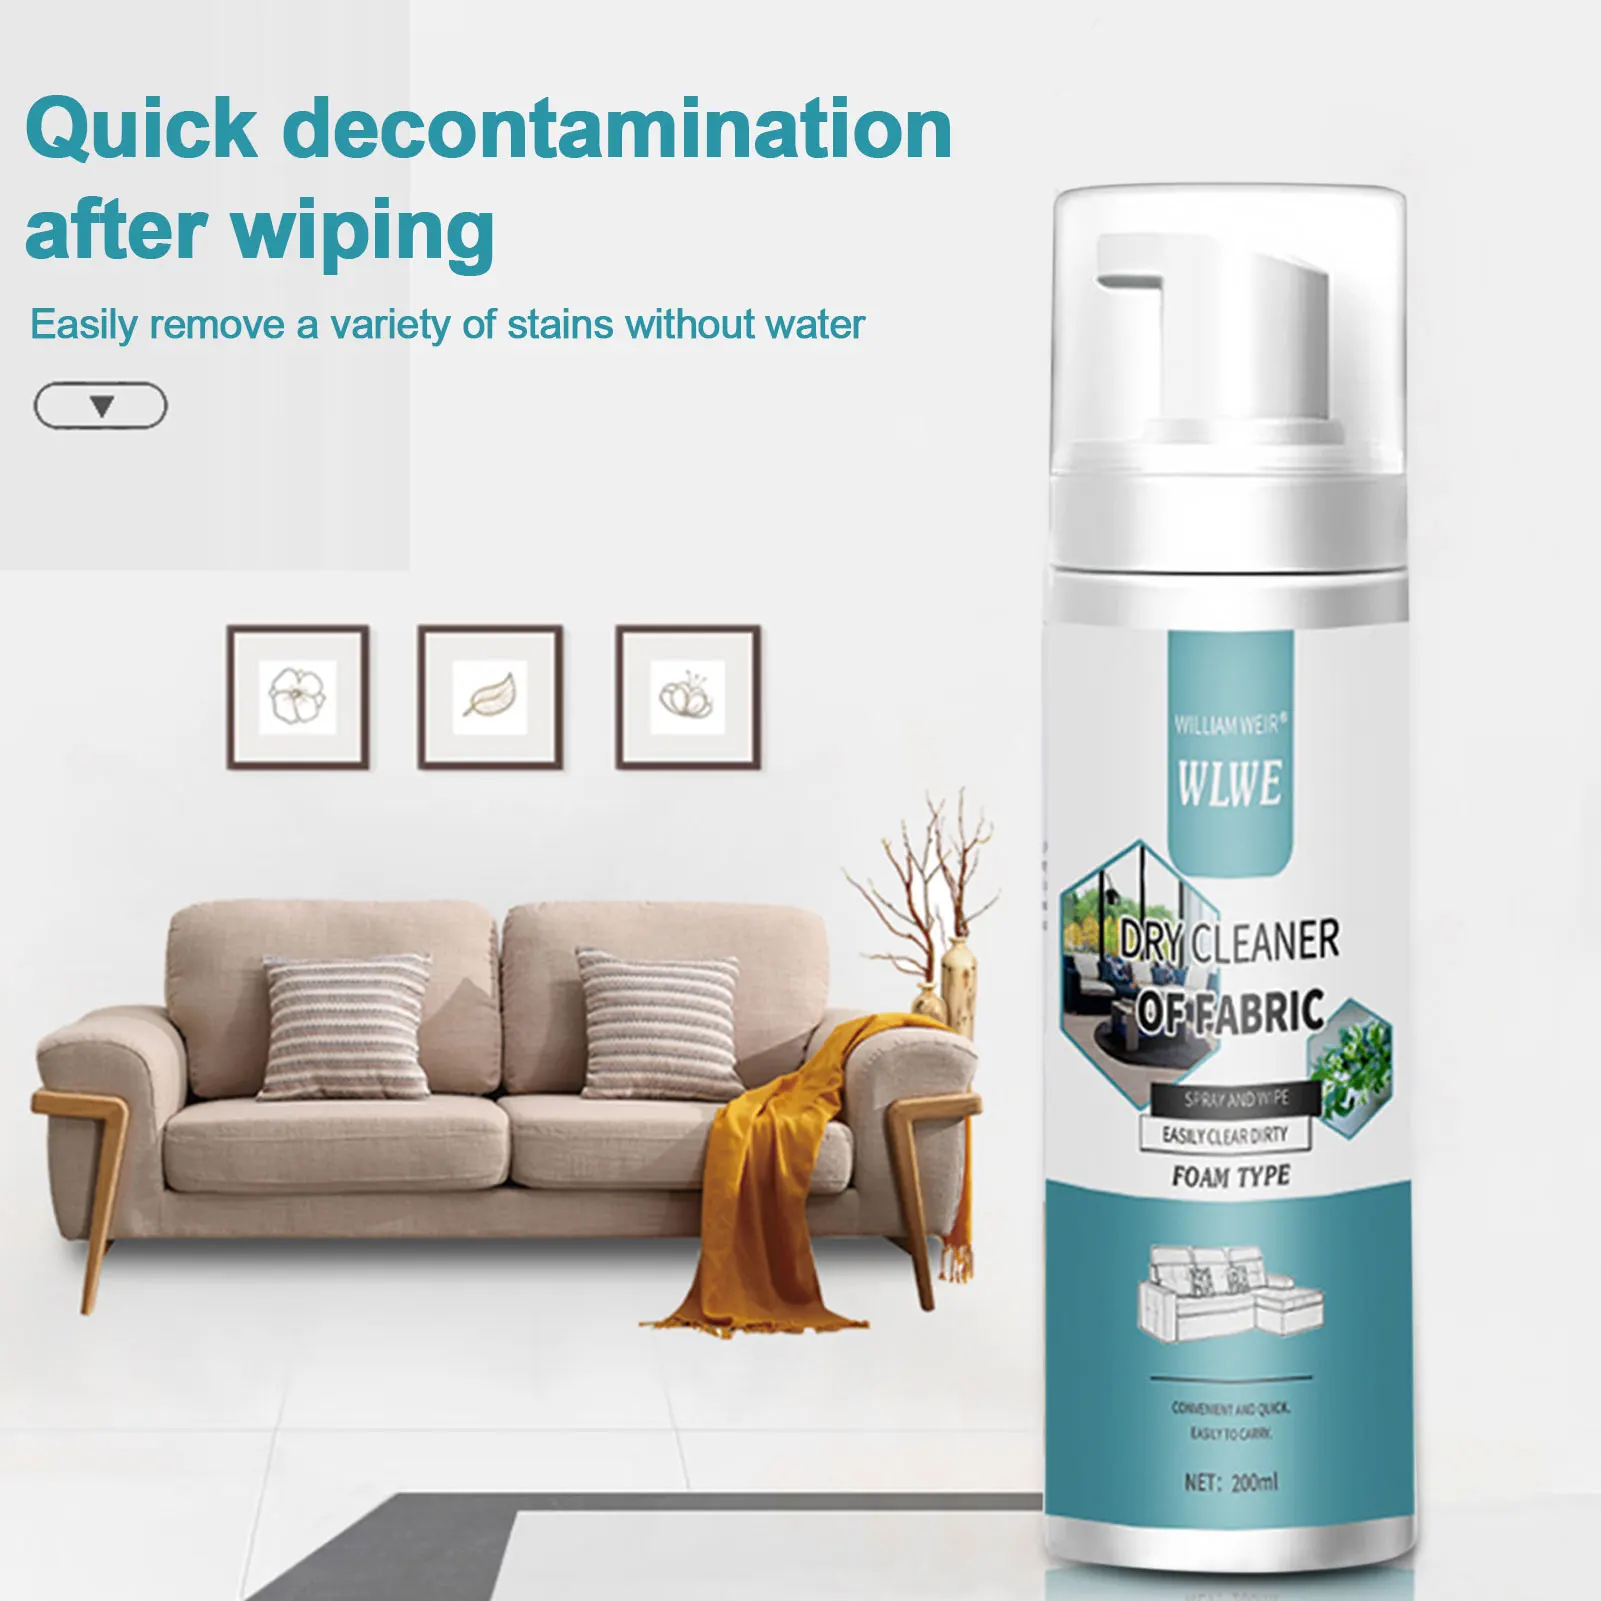 https://ae01.alicdn.com/kf/S24d9cbfa7f514a738a5e2fffba7c653dm/Couch-Fabric-Cleaner-Upholstery-Cleaner-Car-Seat-Carpet-MultiPurpose-Foam-Cleaner-Powerful-Decontaminate-Quick-DrySofa-Curtain.jpg